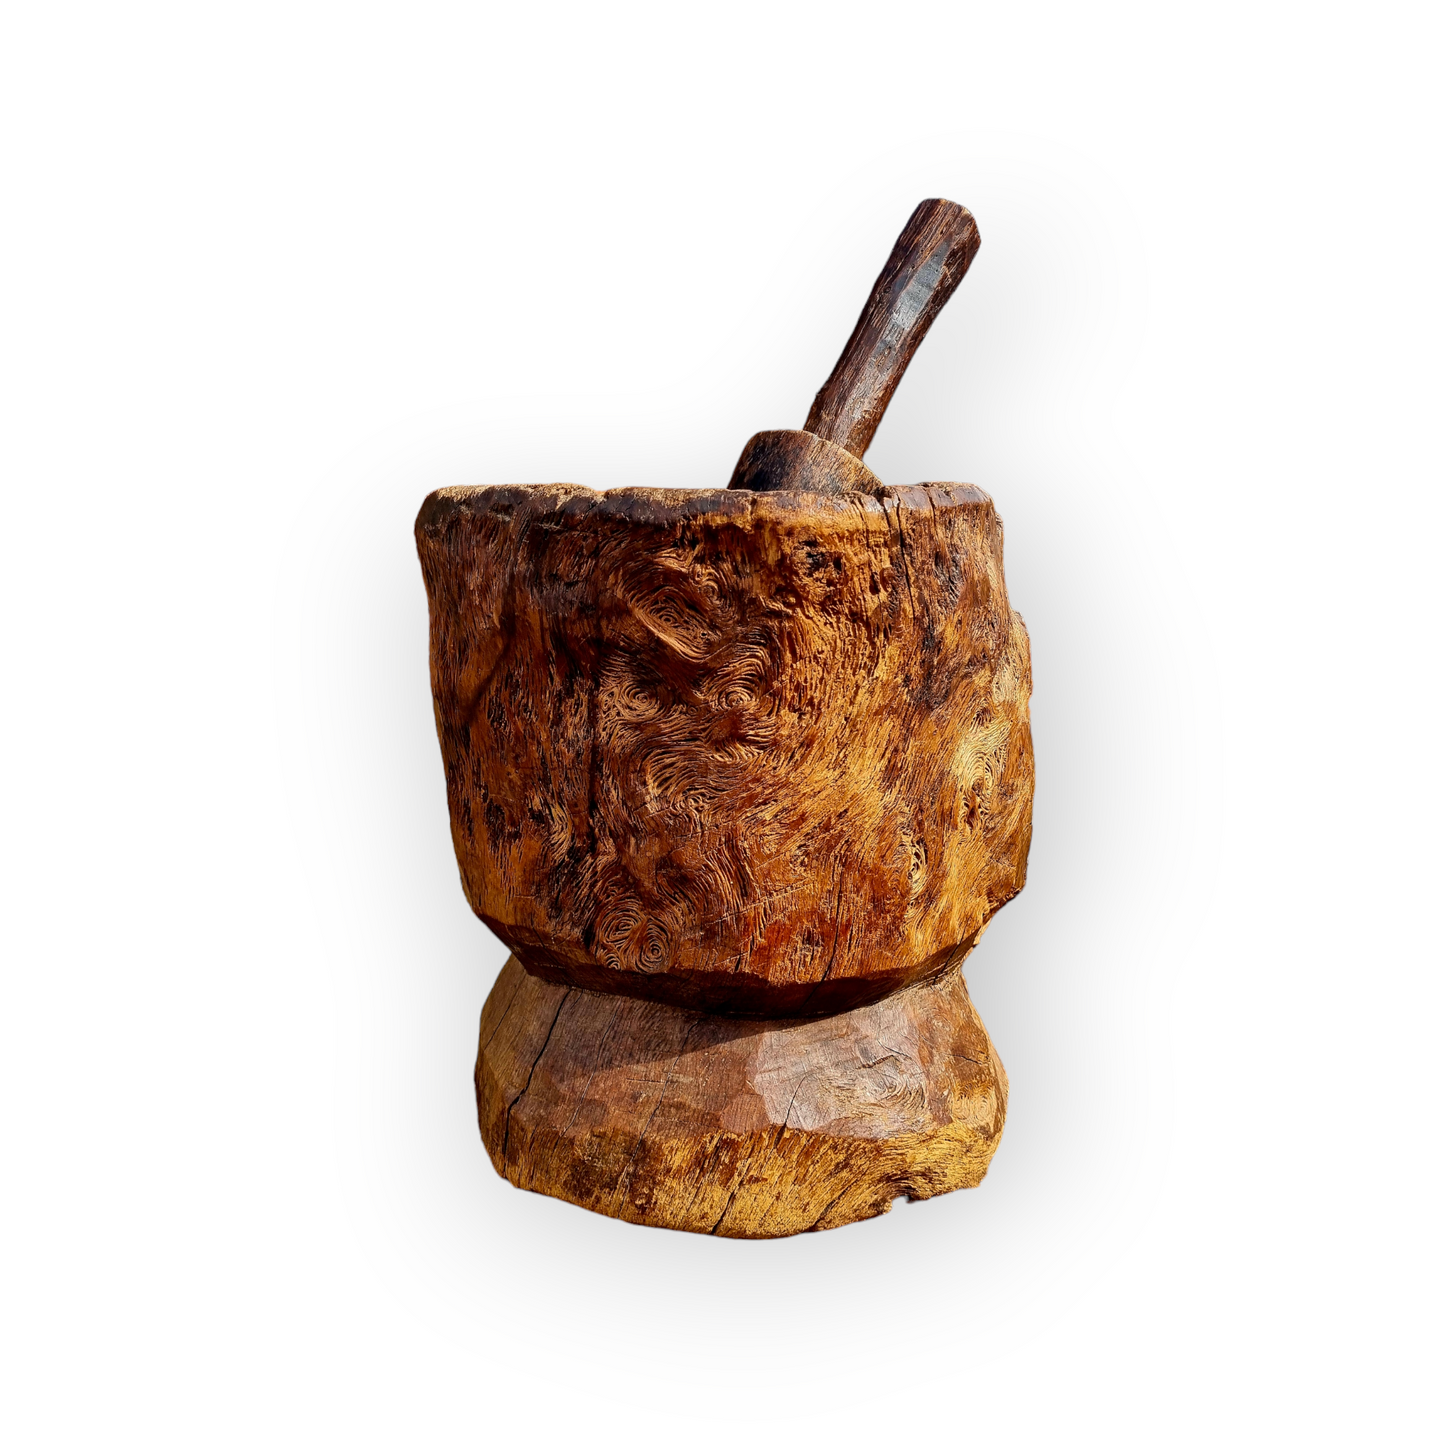 An Incredibly Large 18th Century English Antique Burr Oak Dug-Out Mortar & Pestle, The Mortar Standing 33 cm (13") High